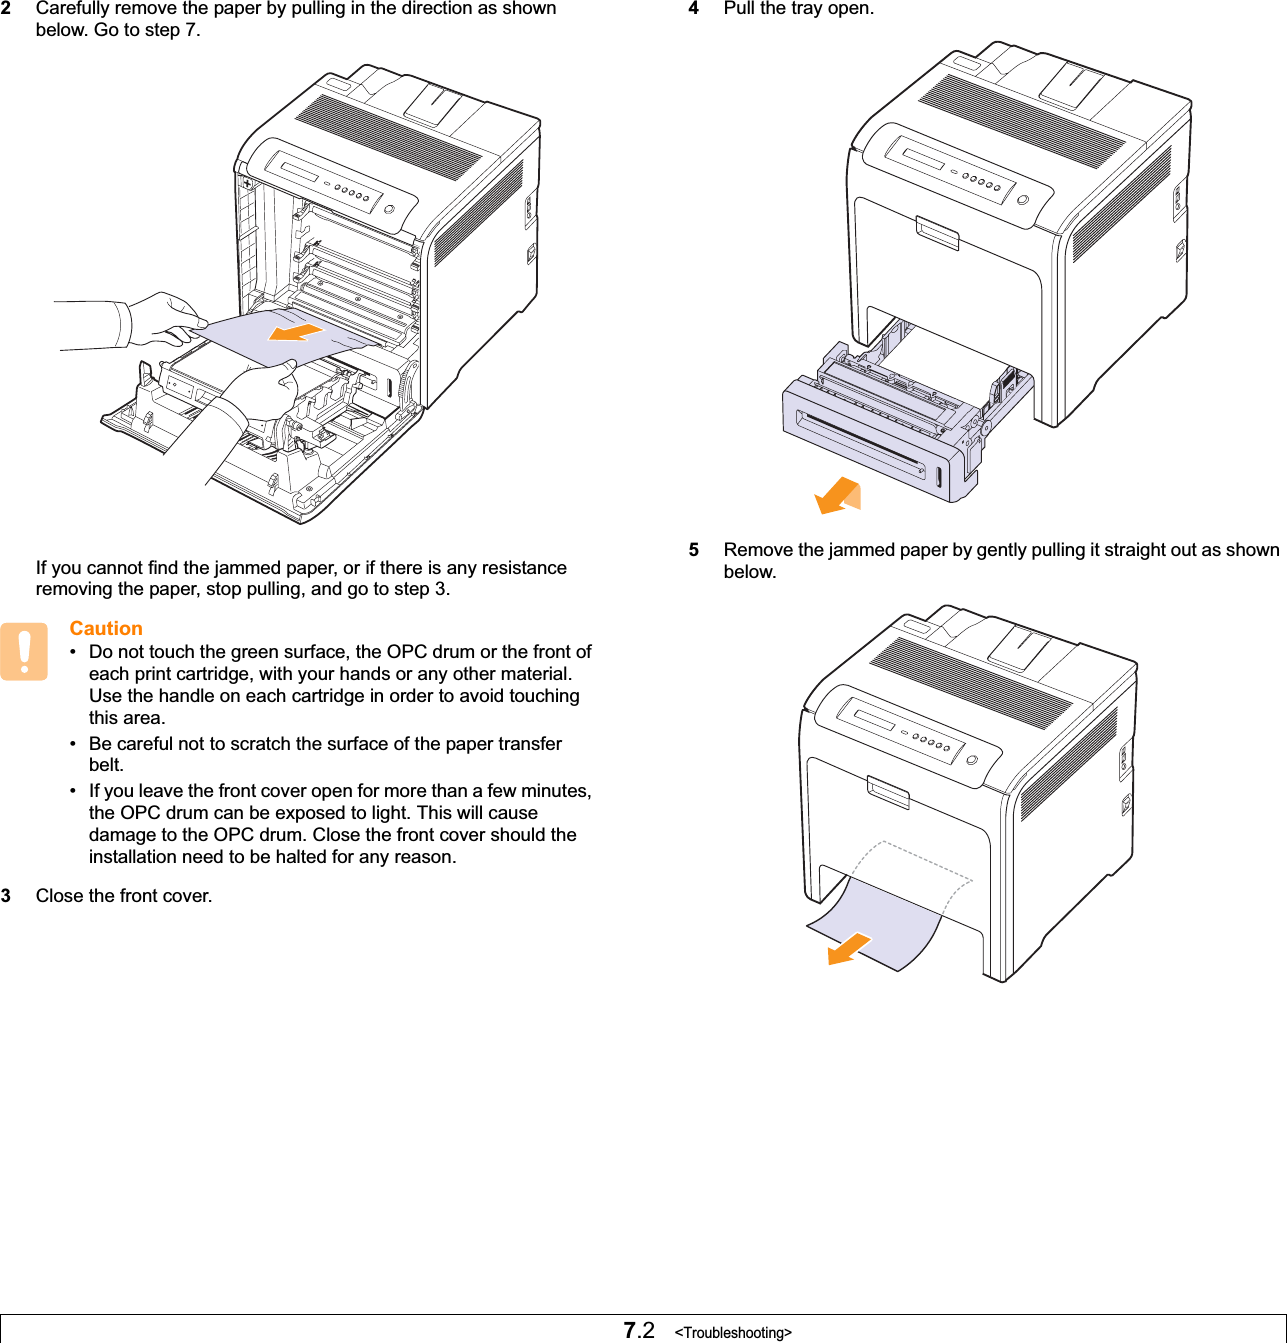 7.2   &lt;Troubleshooting&gt;2Carefully remove the paper by pulling in the direction as shown below. Go to step 7.If you cannot find the jammed paper, or if there is any resistance removing the paper, stop pulling, and go to step 3.Caution• Do not touch the green surface, the OPC drum or the front of each print cartridge, with your hands or any other material. Use the handle on each cartridge in order to avoid touching this area.• Be careful not to scratch the surface of the paper transfer belt.• If you leave the front cover open for more than a few minutes, the OPC drum can be exposed to light. This will cause damage to the OPC drum. Close the front cover should the installation need to be halted for any reason.3Close the front cover.4Pull the tray open. 5Remove the jammed paper by gently pulling it straight out as shown below.